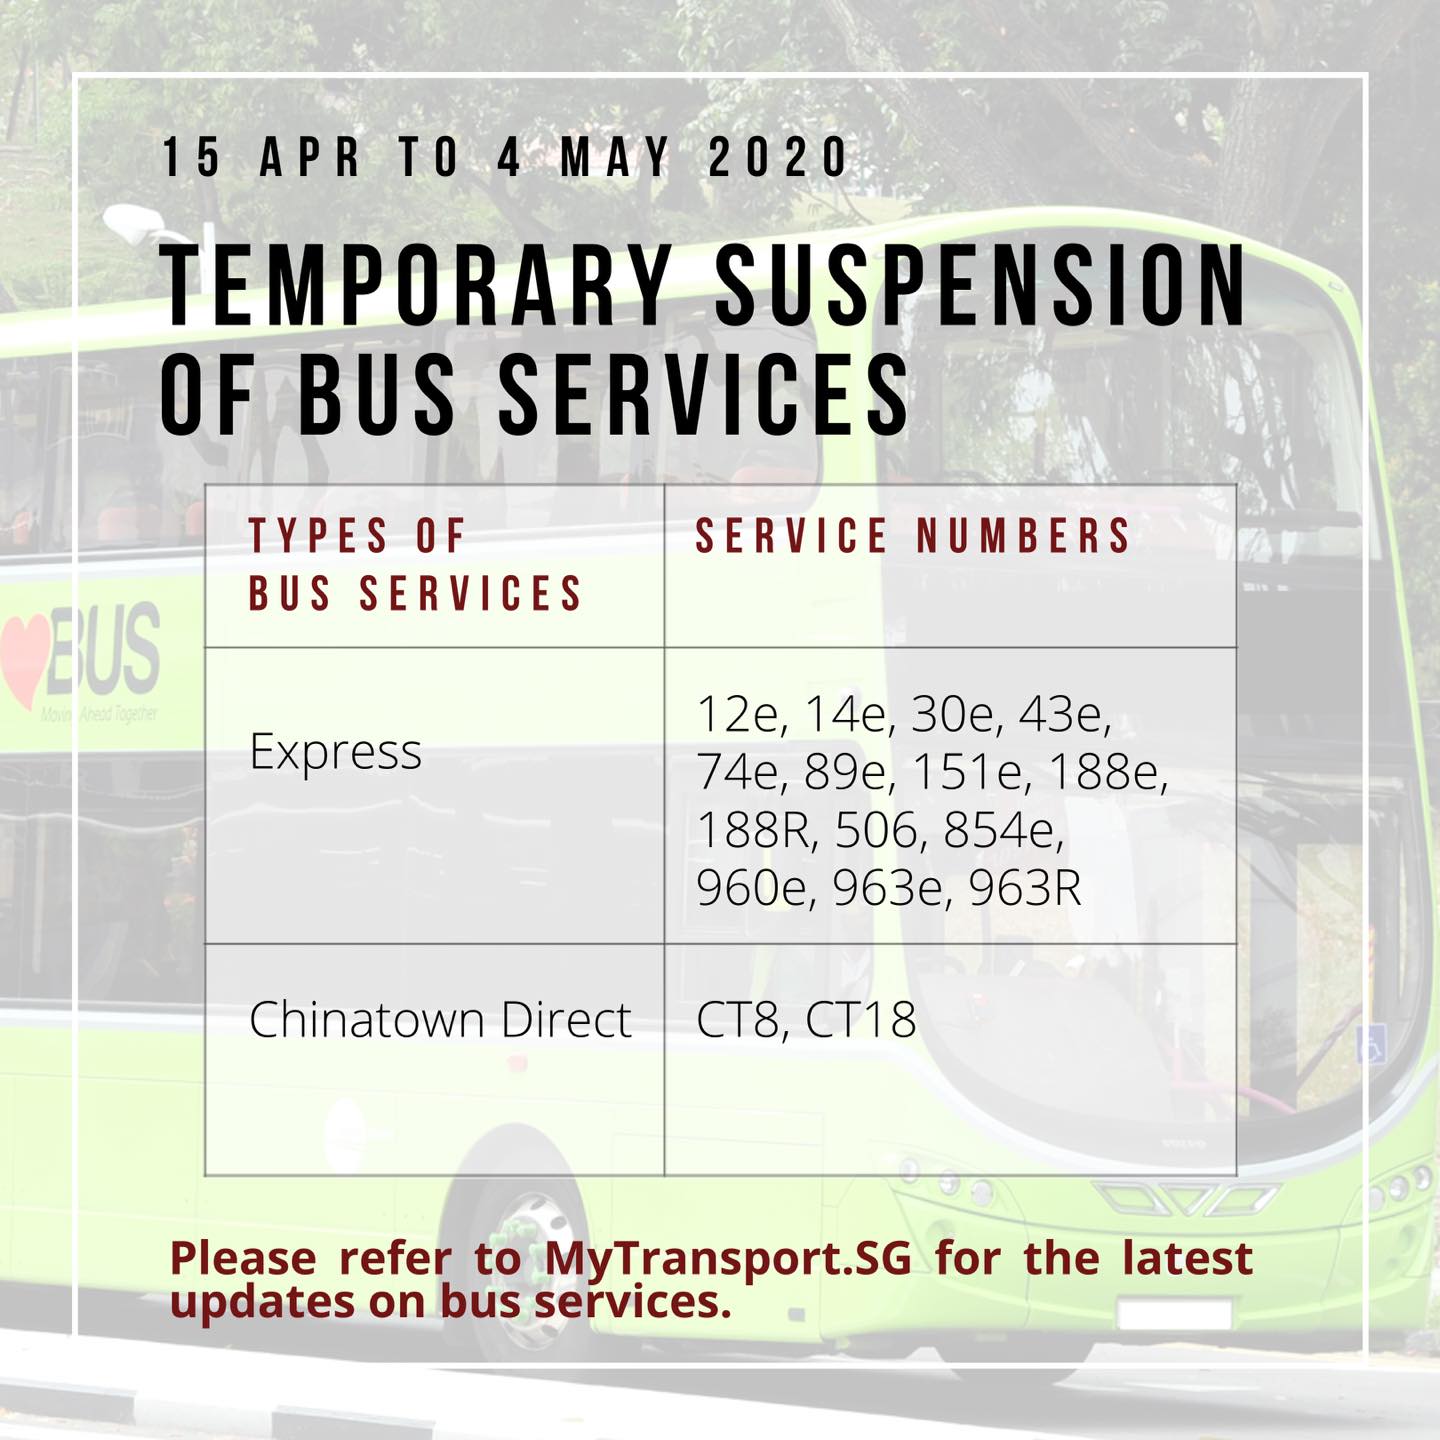 Official consolidated information from Land Transport Authority on temporary bus service suspension during COVID-19 Circuit Breaker measures from 15 April 2020.